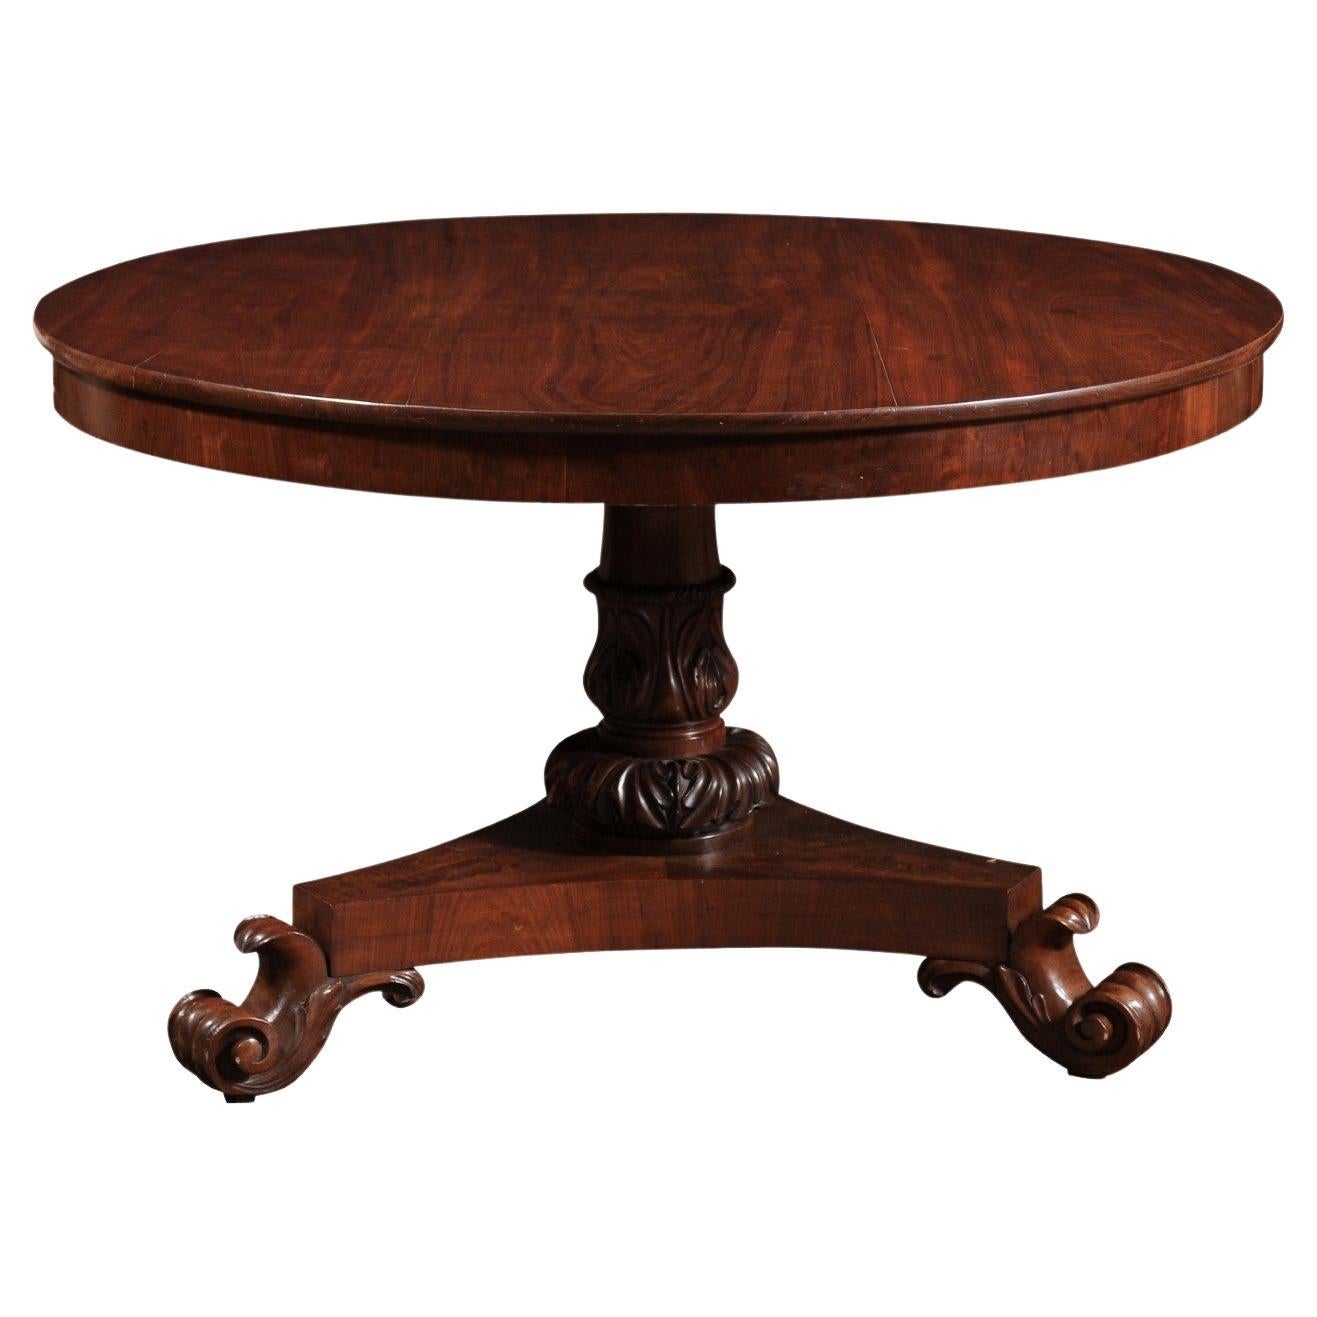  19th Century English Mahogany Center Table with Pedestal Base & Scroll Feet